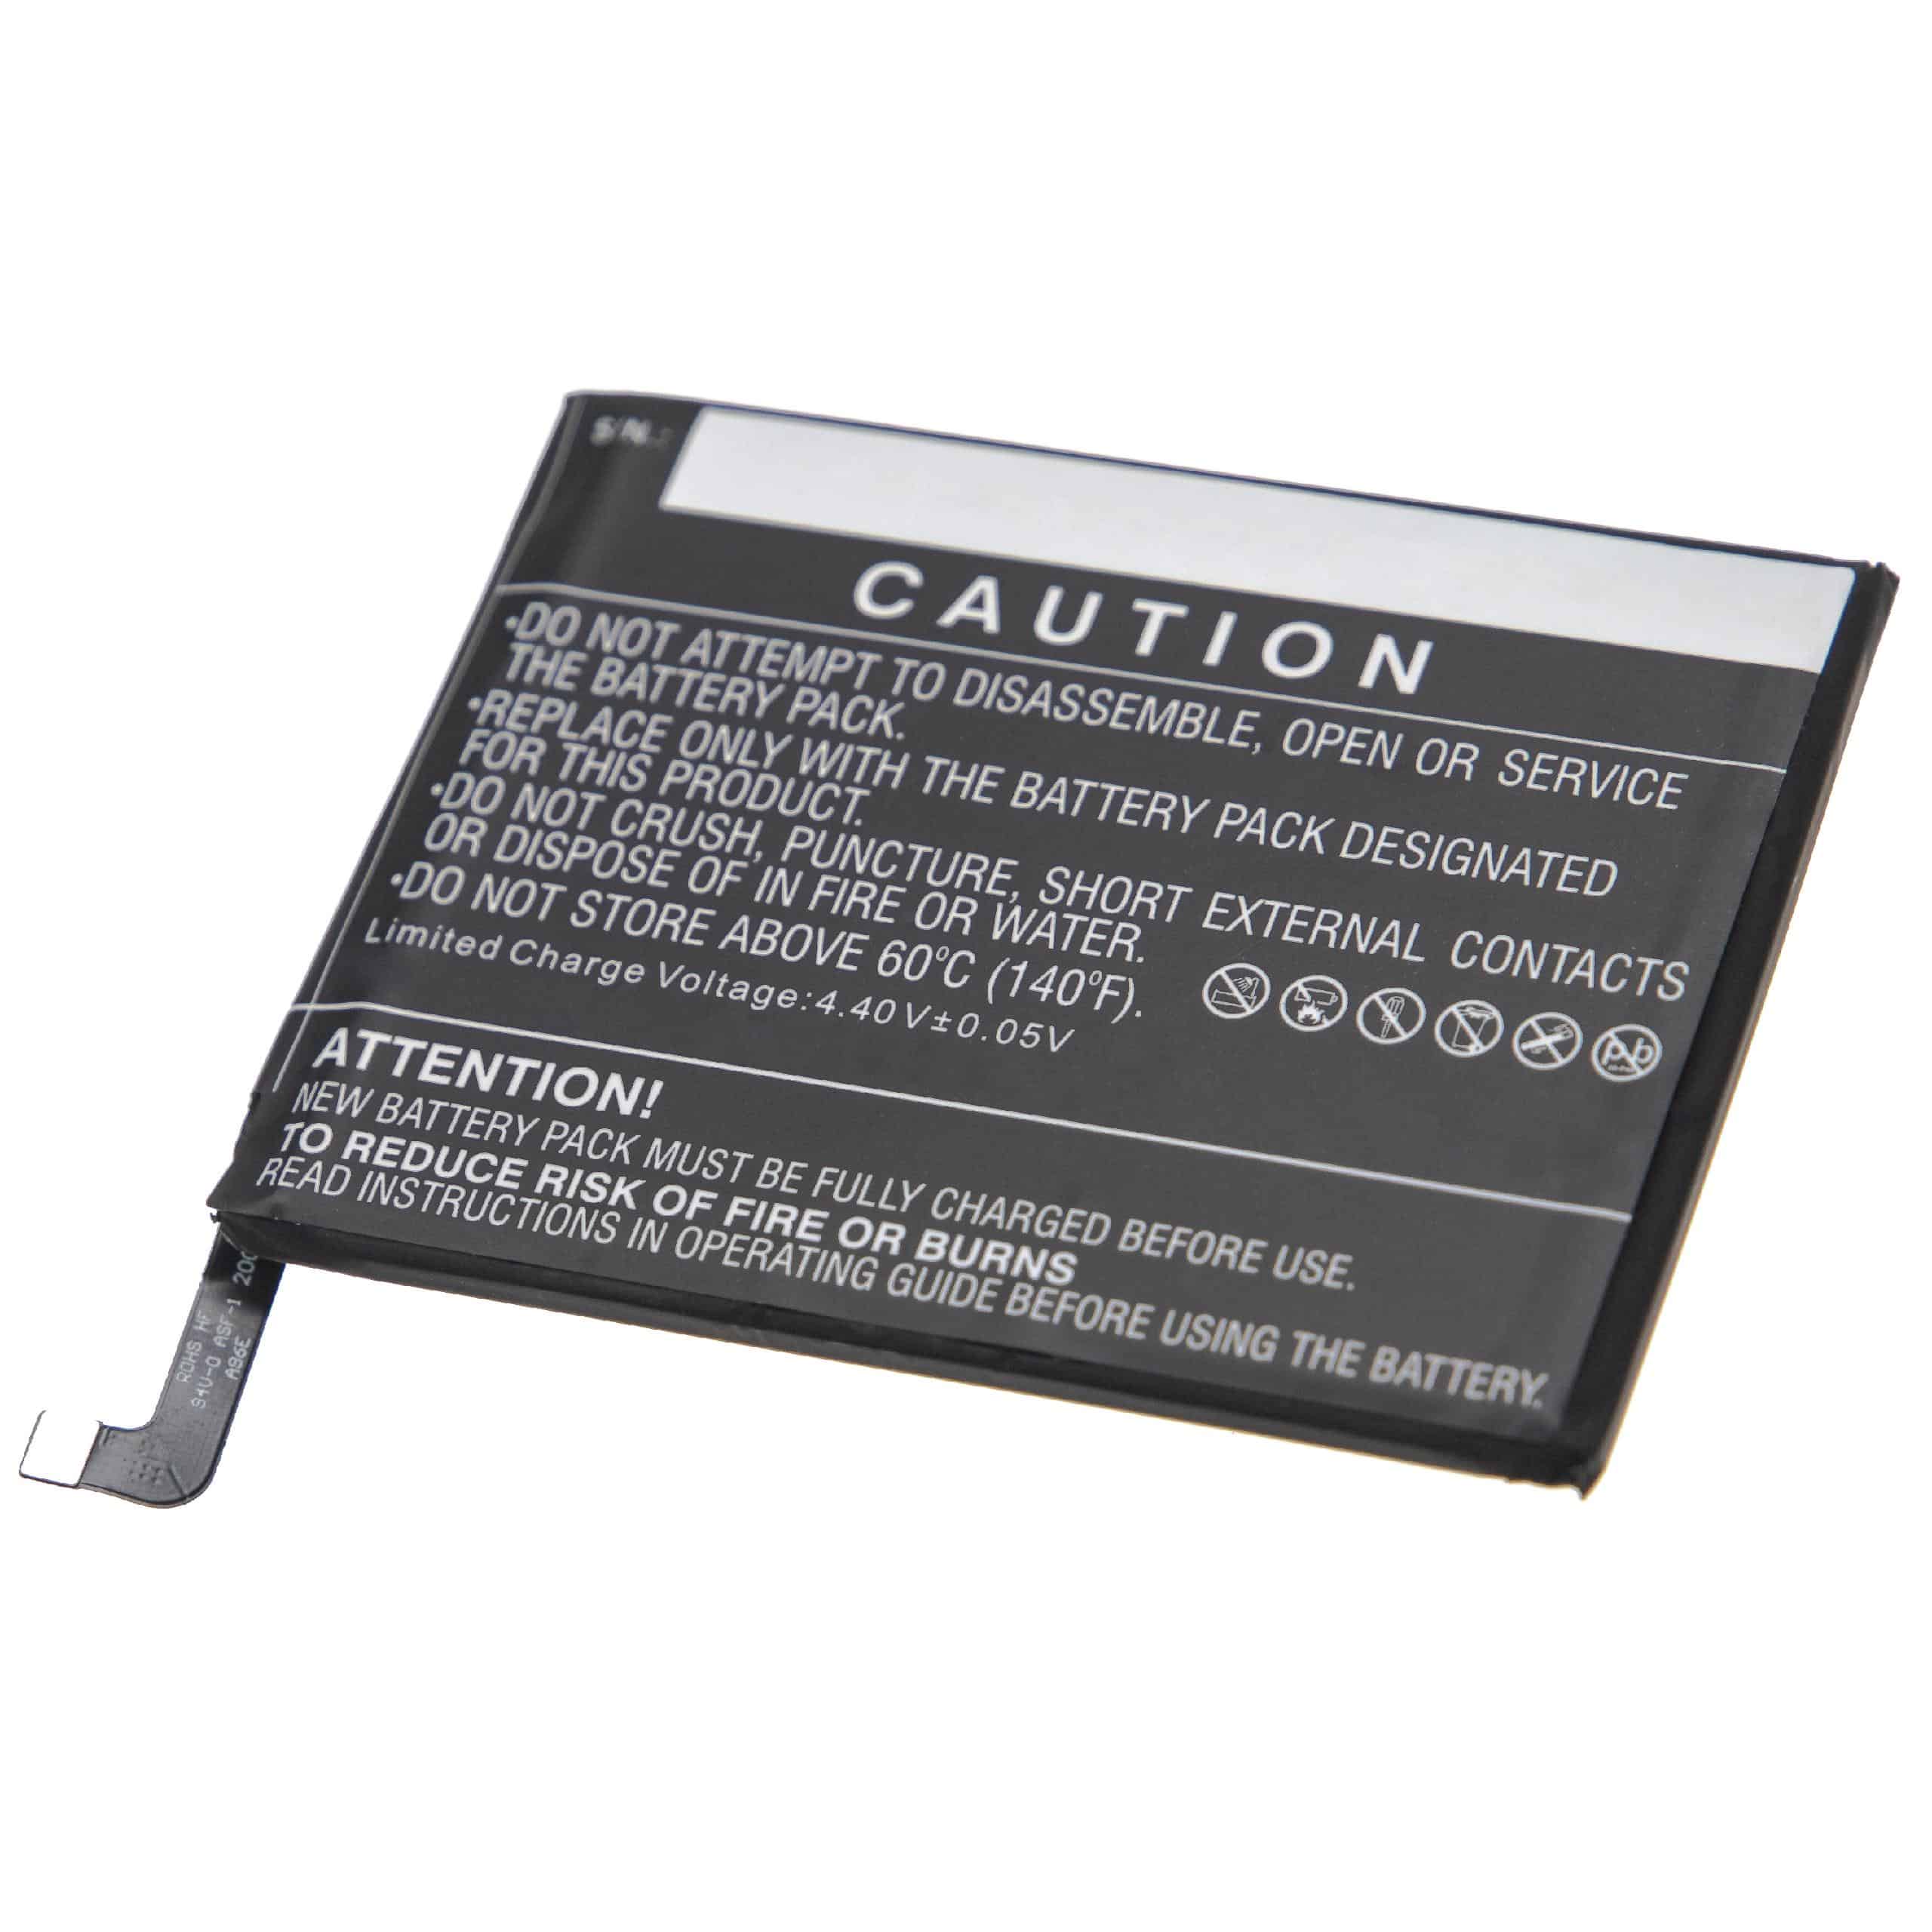 Mobile Phone Battery for Samsung Galaxy A10s, A10s 2019, SM-A107, SM-A107F/DS, SM-A107M/DS, A21, A215 - 3900mA